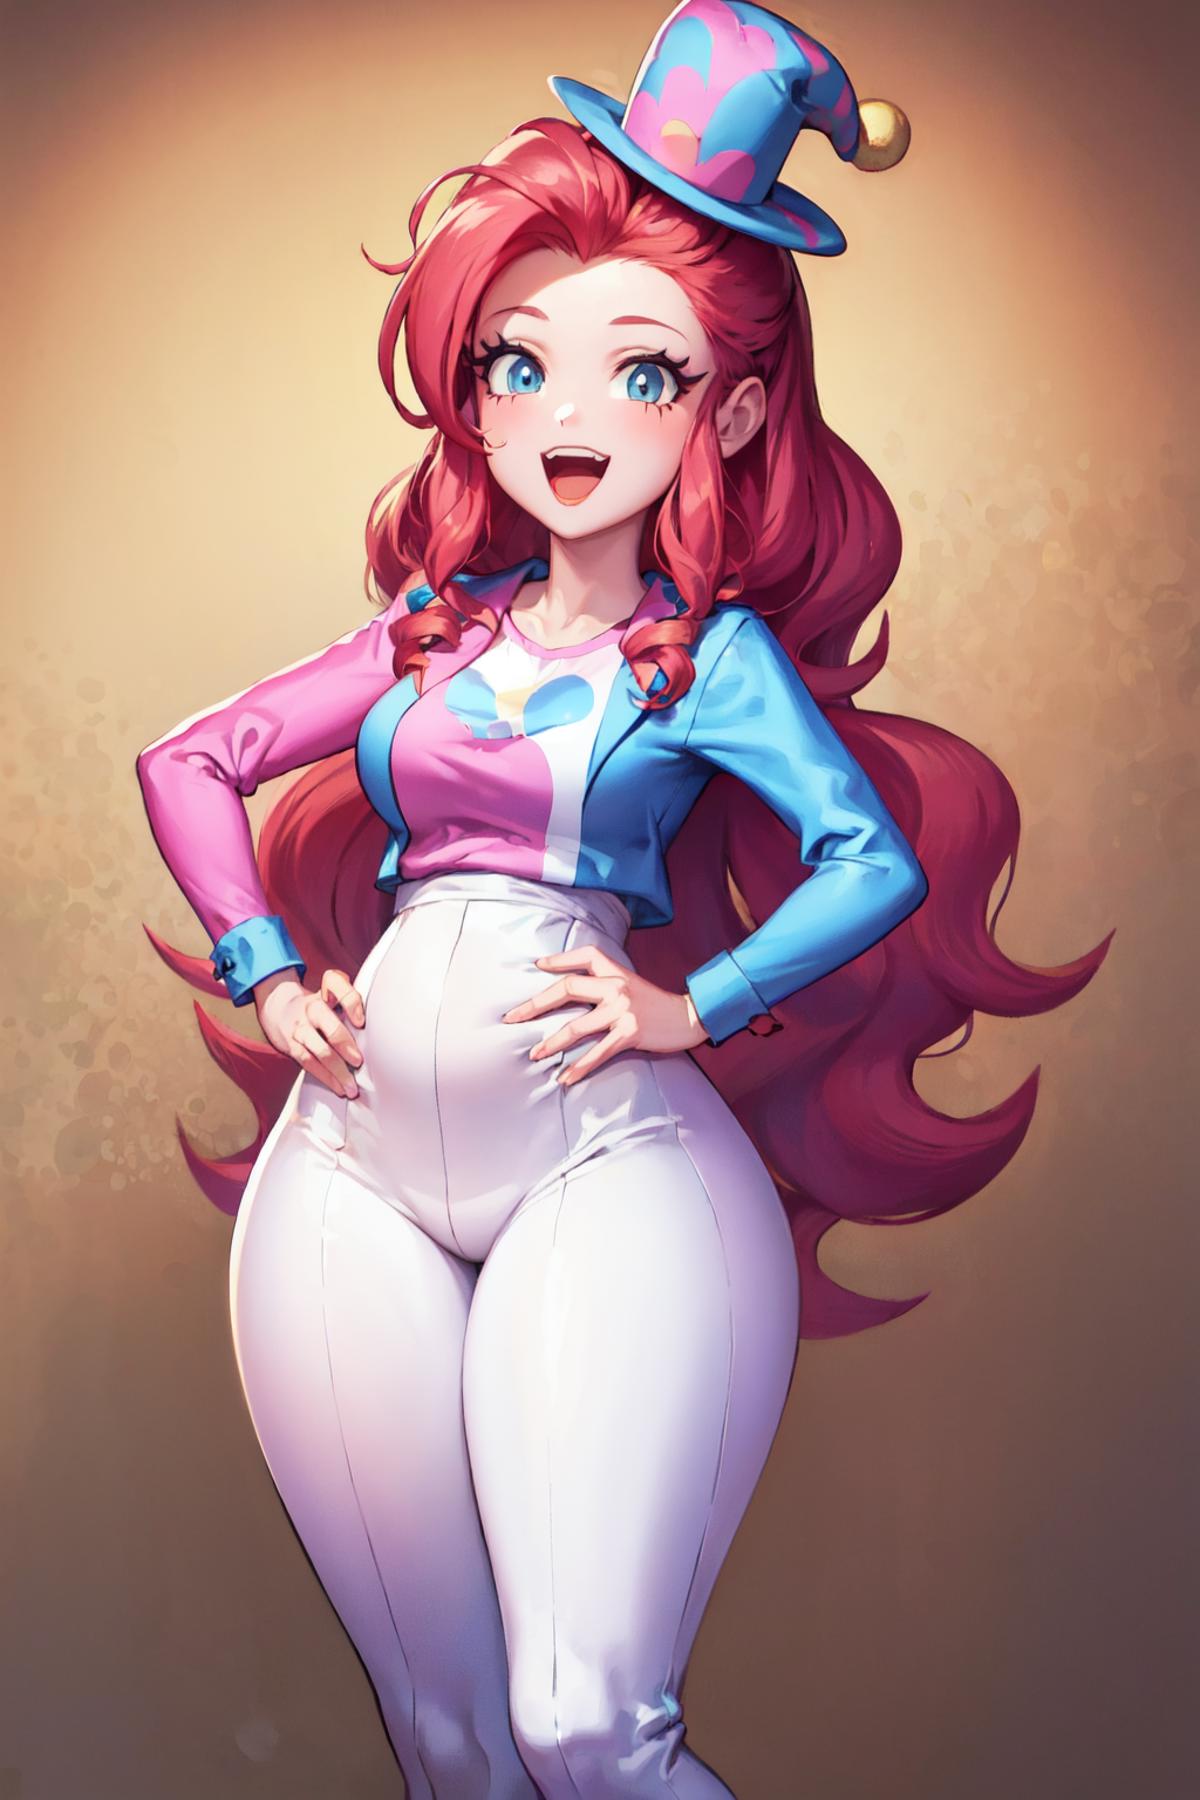 Pinkie Pie | My Little Pony / Equestria Girls image by Flutts